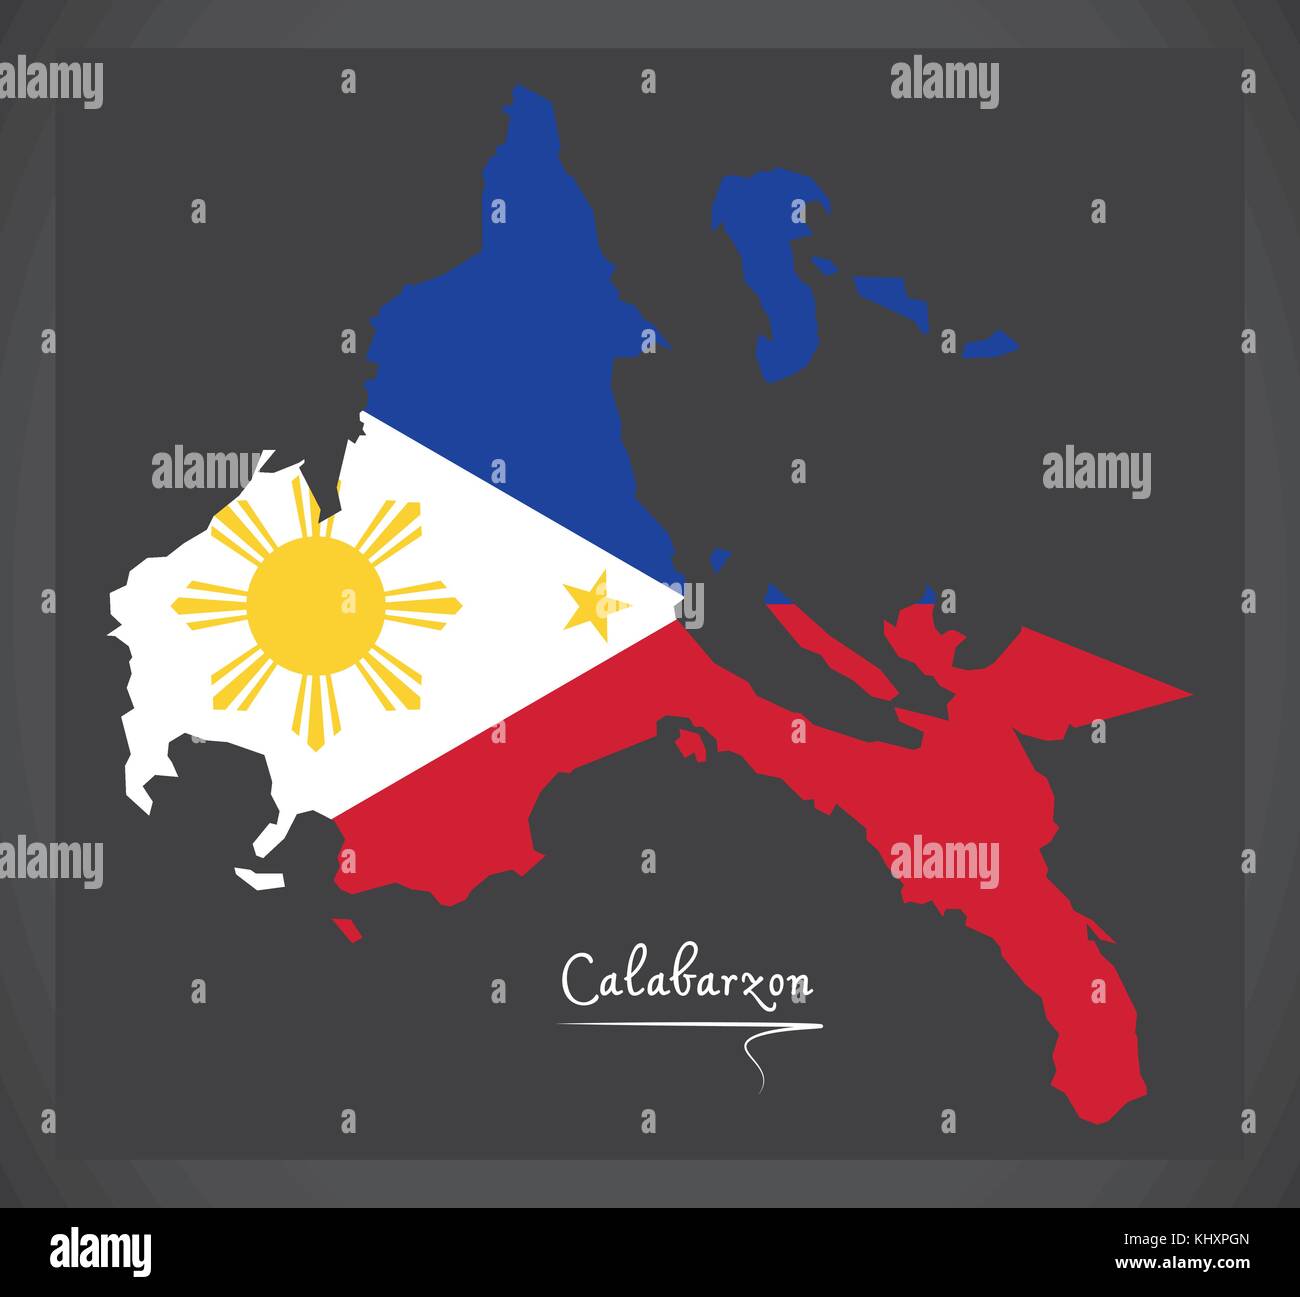 Calabarzon map of the Philippines with Philippine national flag illustration Stock Vector